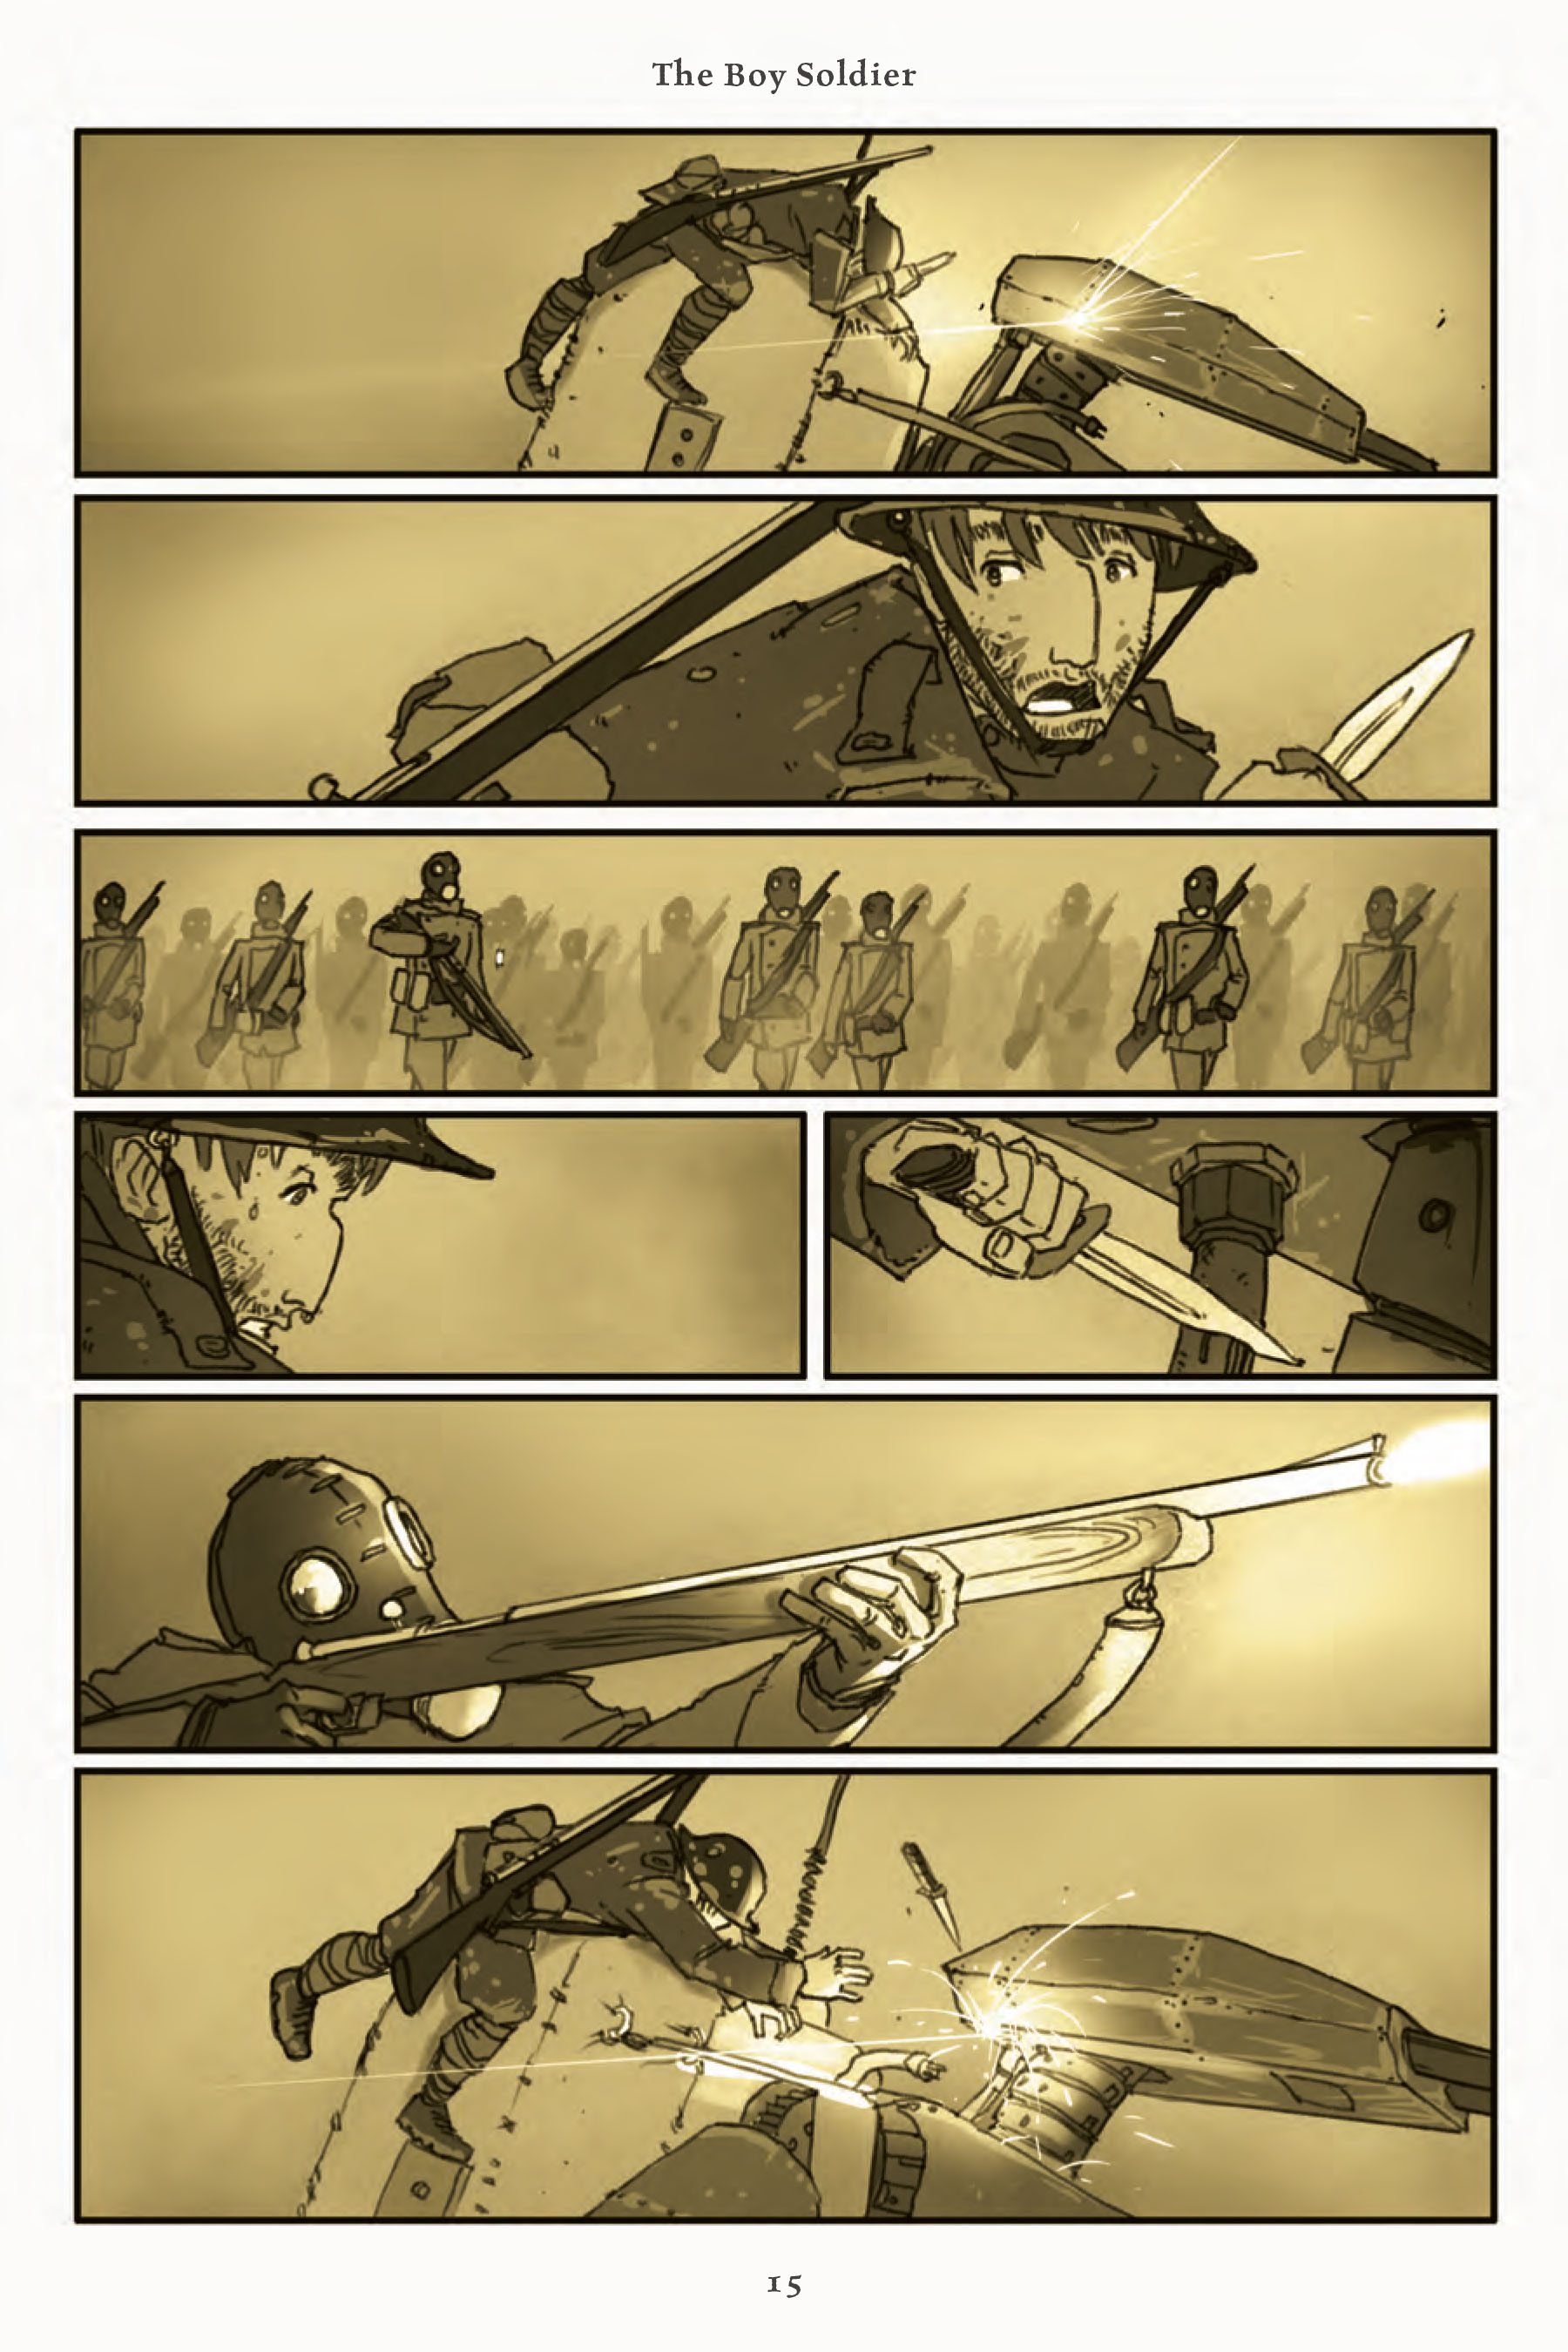 Rust_The_Boy_Soldier_TP_Page_15